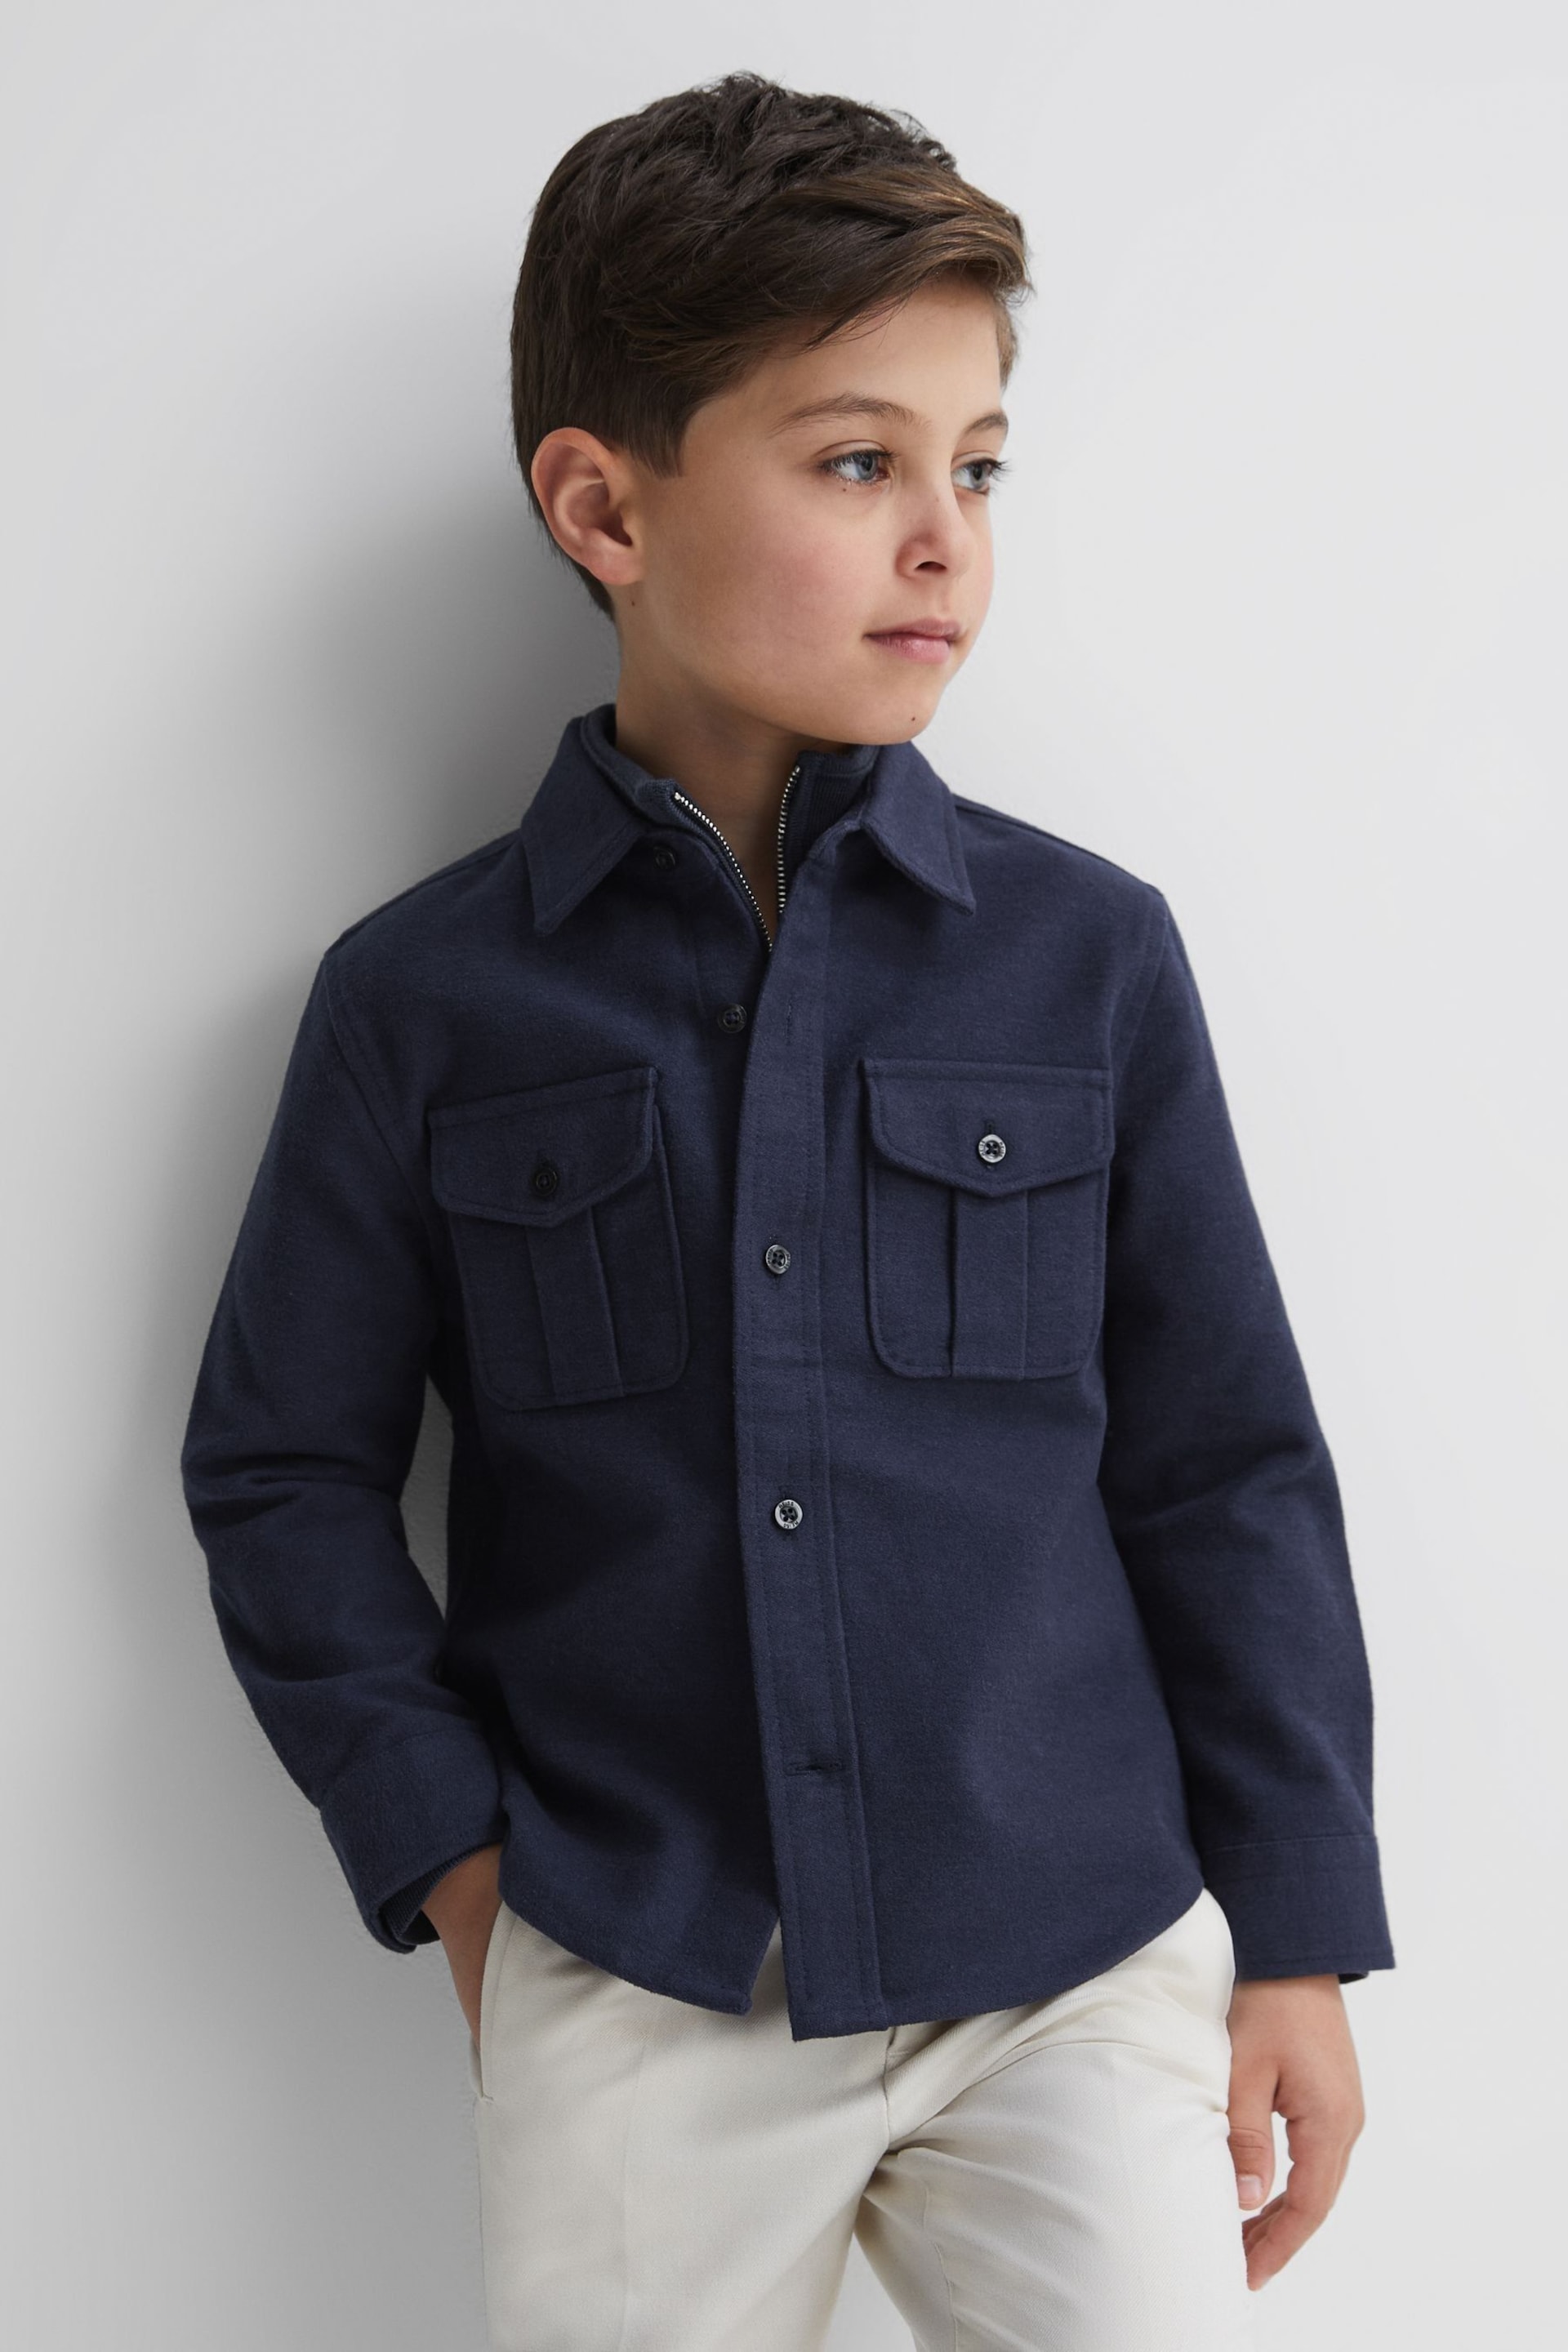 Reiss Eclipse Blue Thomas Junior Brushed Cotton Patch Pocket Overshirt - Image 1 of 6